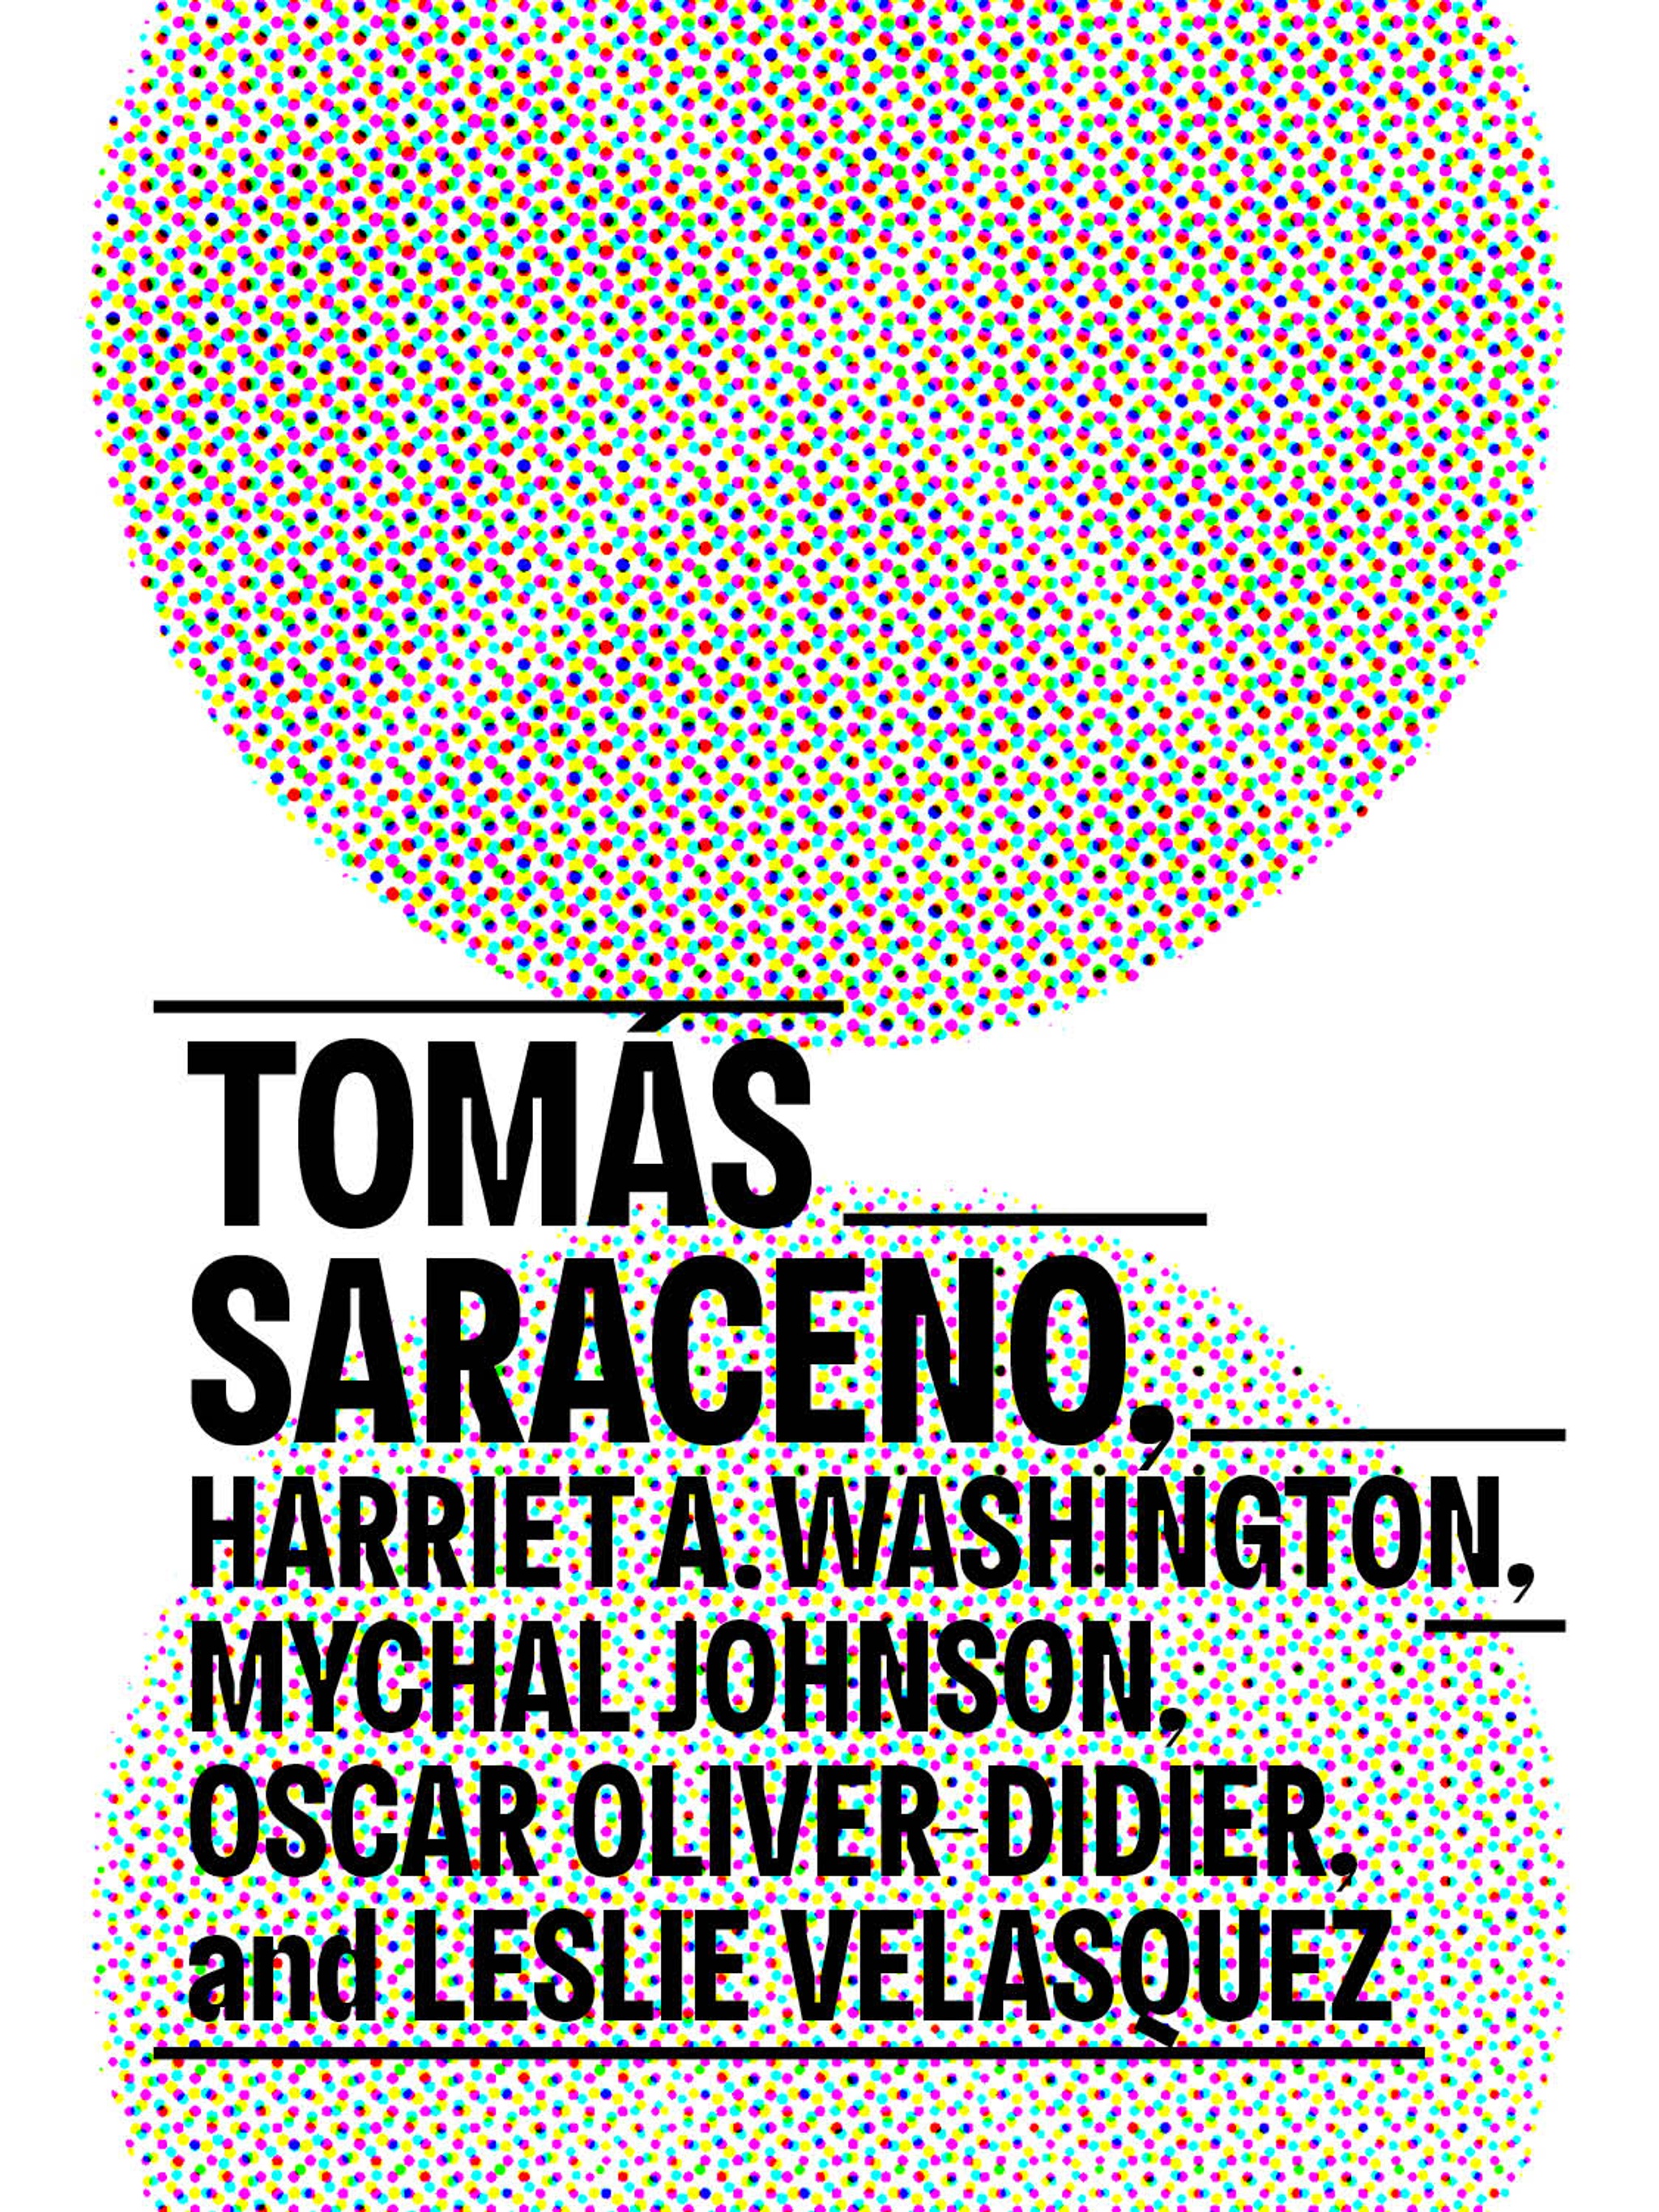 A collection of dots in a circular pattern on a white background overlaid with the names Tomás Saraceno, Harriet A. Washington, Mychal Johnson, Oscar Oliver-Didier, and Leslie Velasquez